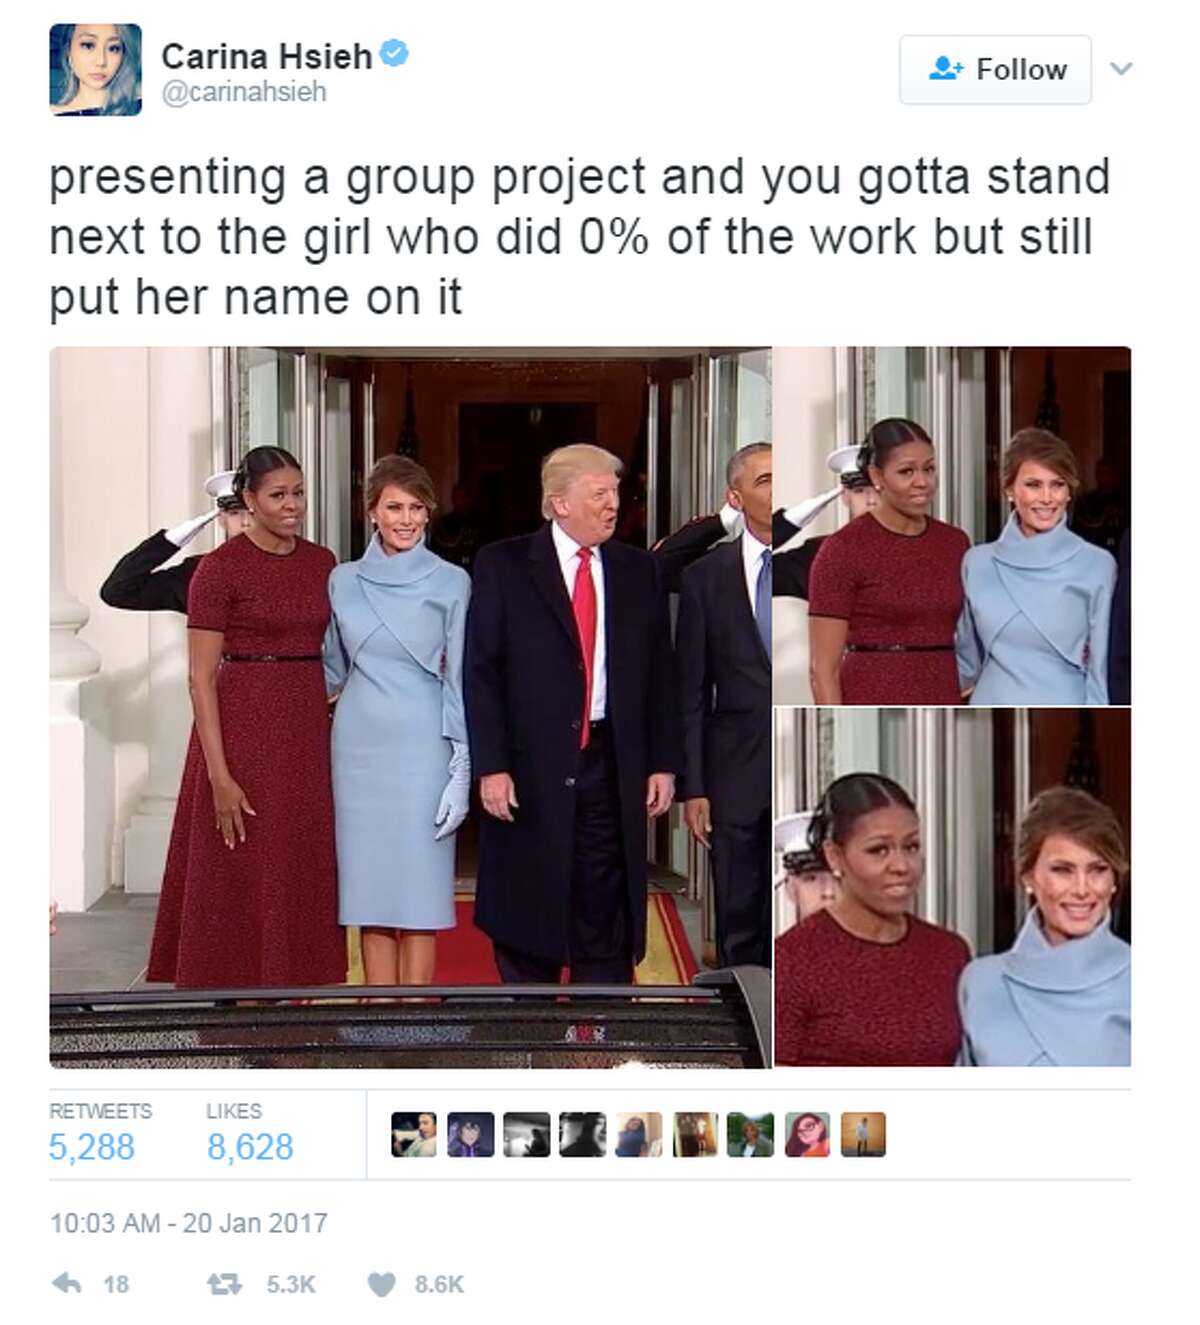 3. Michelle Obama's facial expressions spoke louder than words  @carinahsieh: presenting a group project and you gotta stand next to the girl who did 0% of the work but still put her name on it.